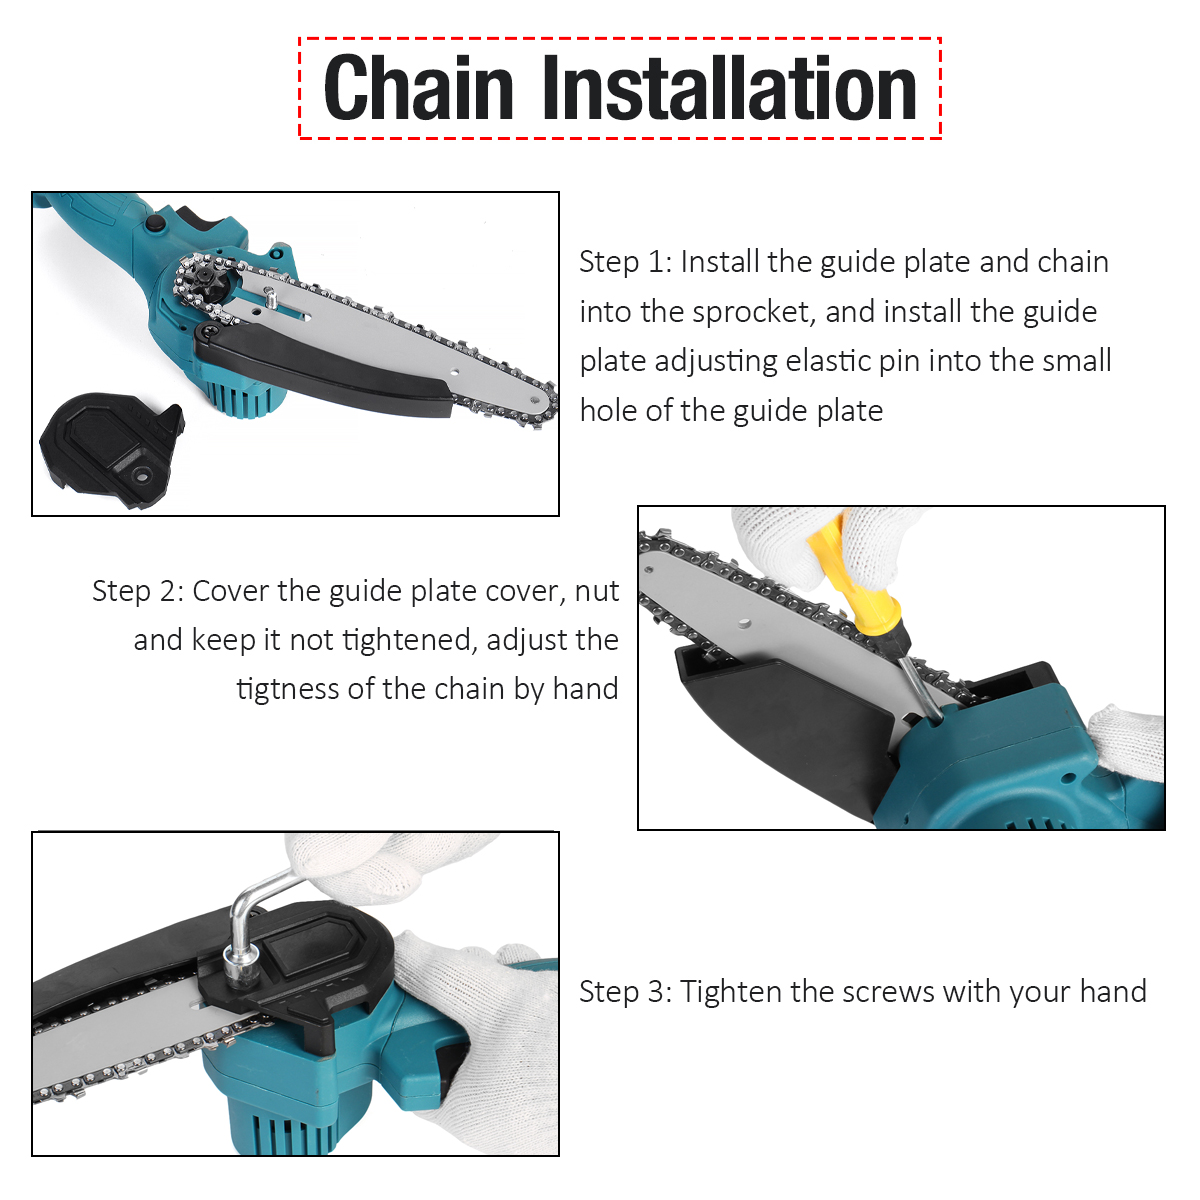 6-Inch-Mini-Electric-Chain-Saw-Rechargeable-Woodworking-Chainsaw-Garden-Power-Tools-1893524-8